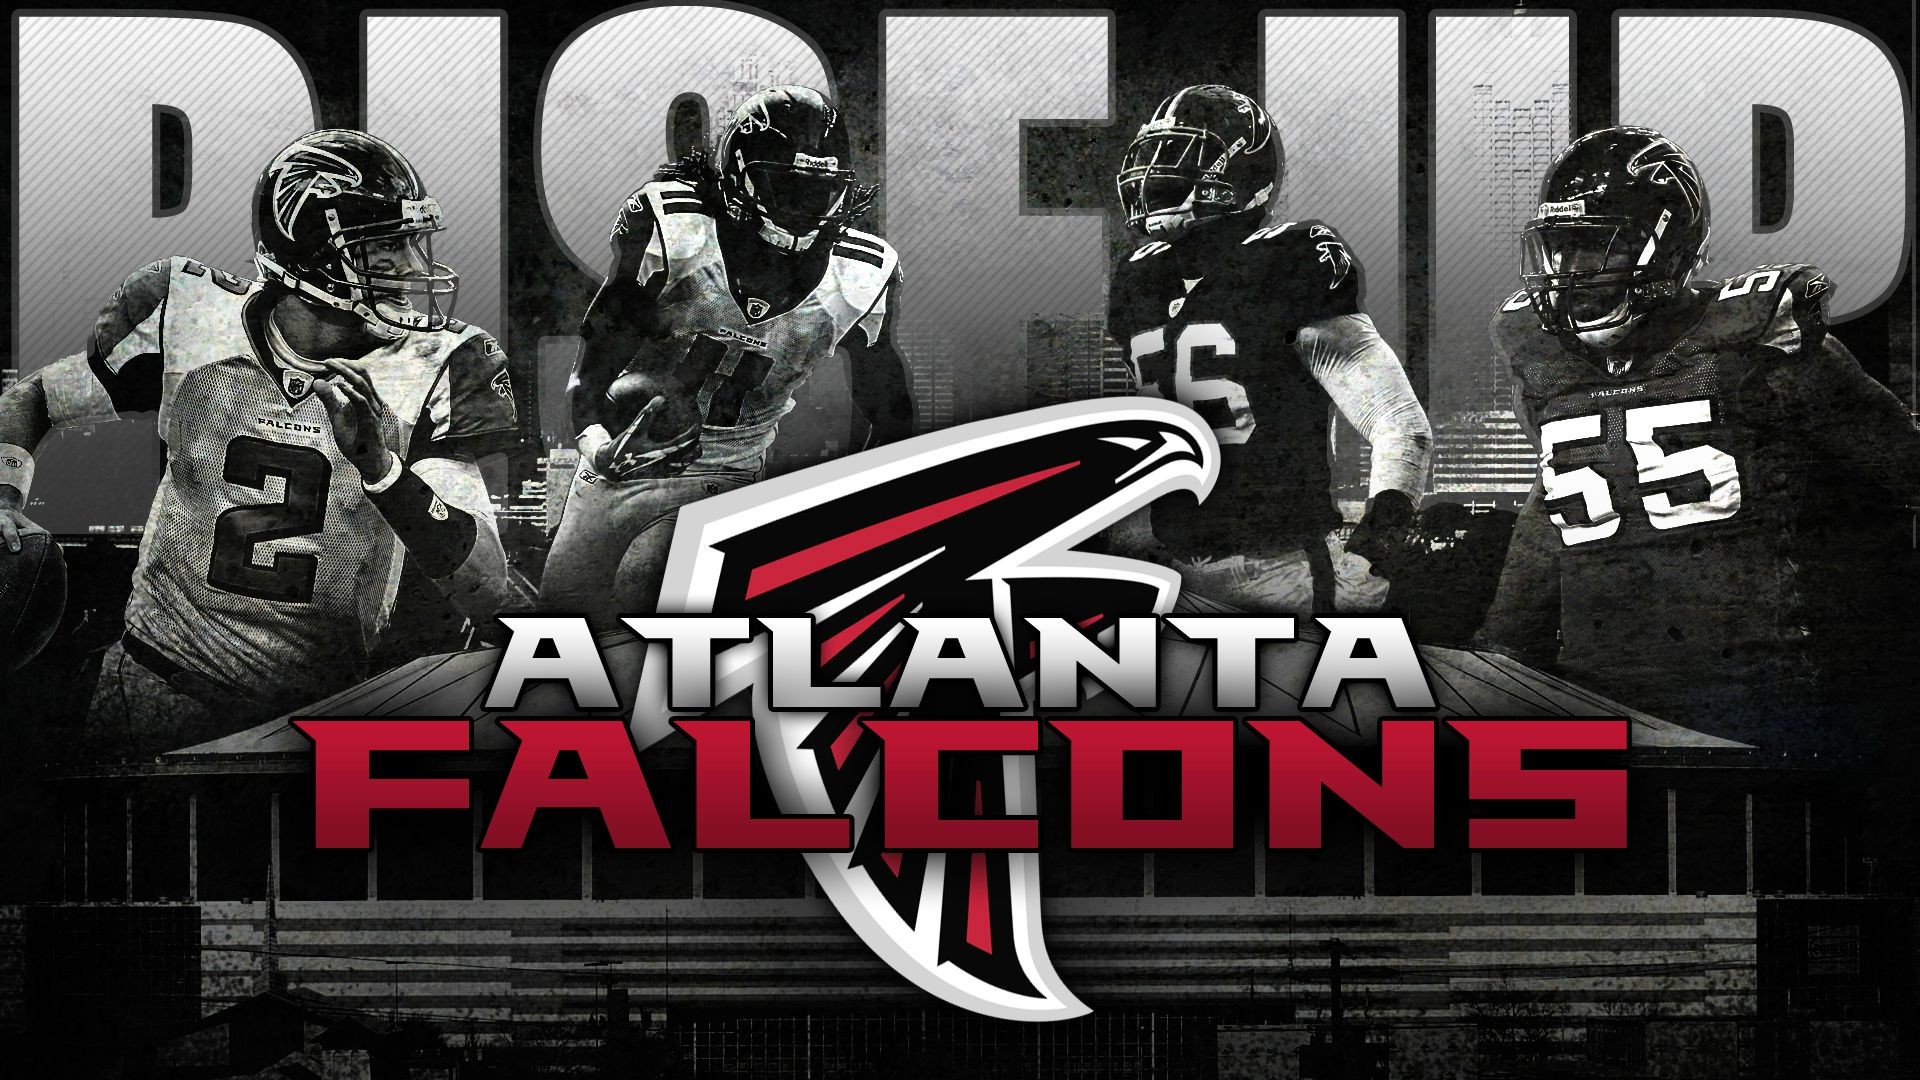 RISE UP FALCONS wallpaper i made for the playoffs. – Imgur